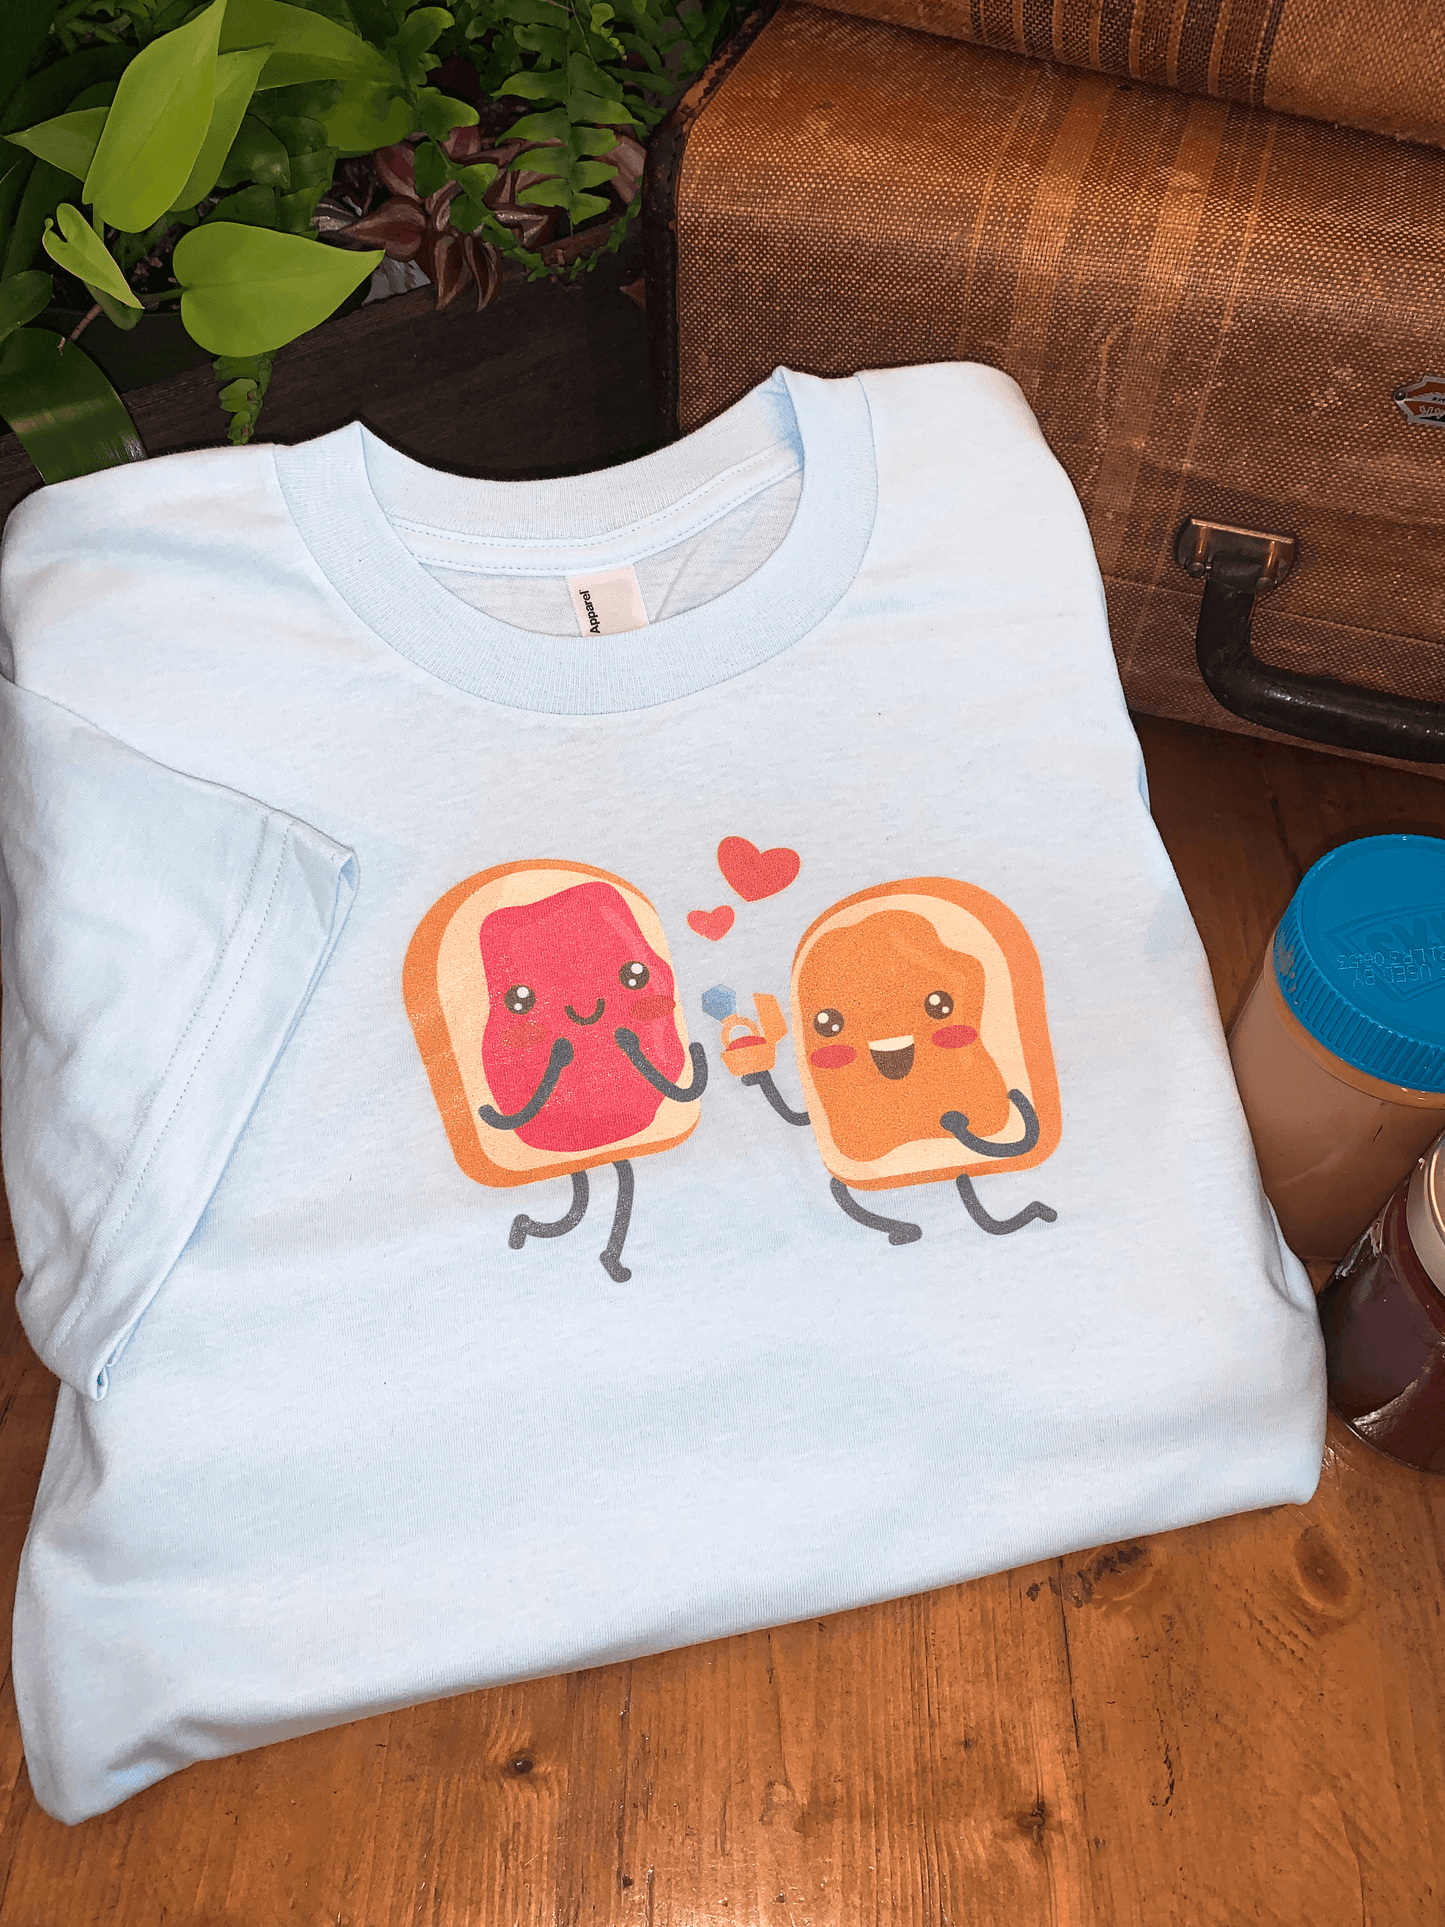 Peanut Butter & Jelly In Love T-Shirt